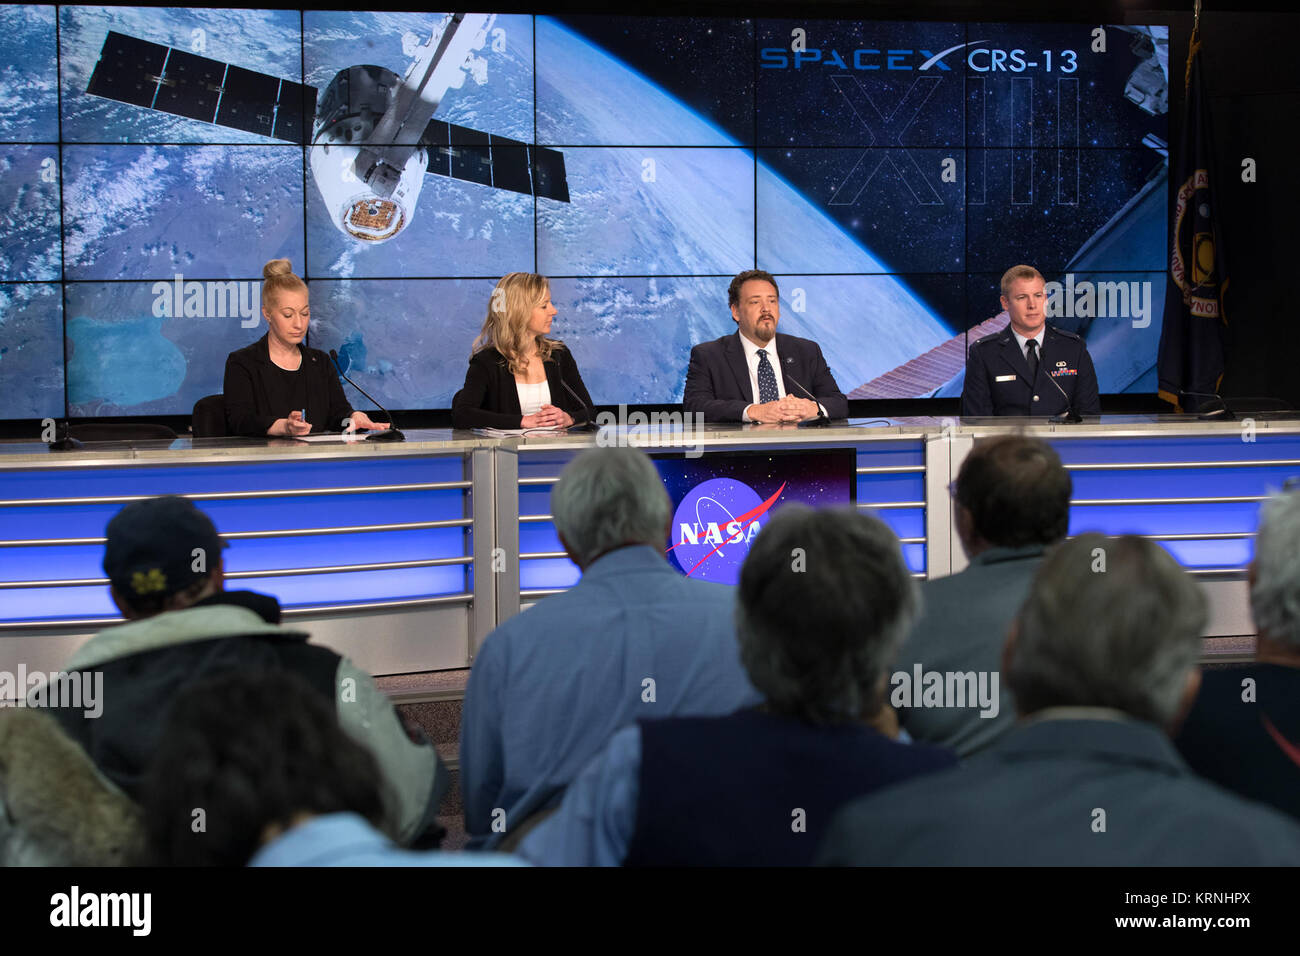 In the Kennedy Space Center’s Press Site auditorium, NASA and industry leaders speak to members of the media during a prelaunch news conference for the SpaceX CRS-13 commercial resupply services mission to the International Space Station. From left are: Cheryl Warner of NASA Communications, Jessica Jensen, SpaceX director of Dragon Mission Management, Kirt Costello, deputy chief scientist for the International Space Station Program Science Office at NASA’s Johnson Space Center in Houston, and Lt. David Myers, weather officer for the 45th Weather Squadron. Kirk Shireman, International Space Sta Stock Photo